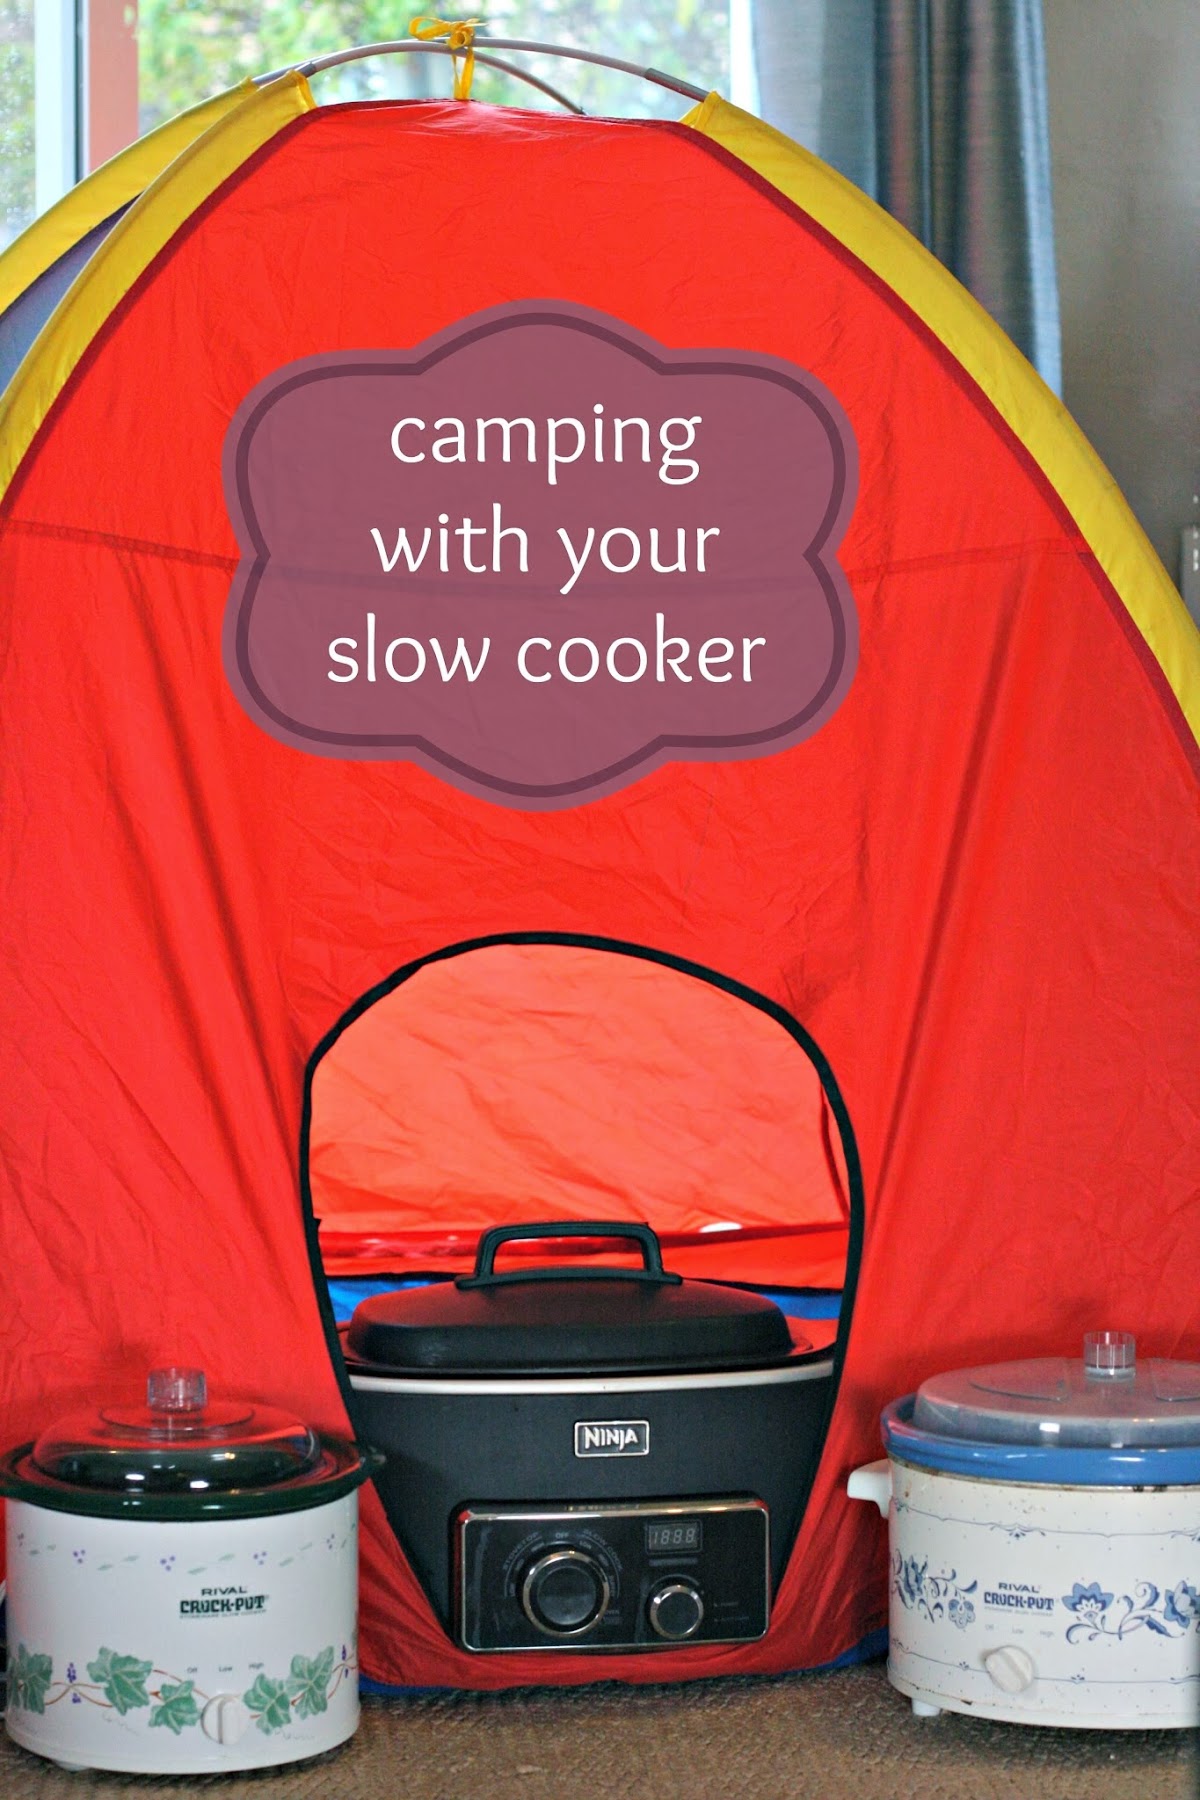 Crockpot Camping & Meal Ideas - A Year of Slow Cooking